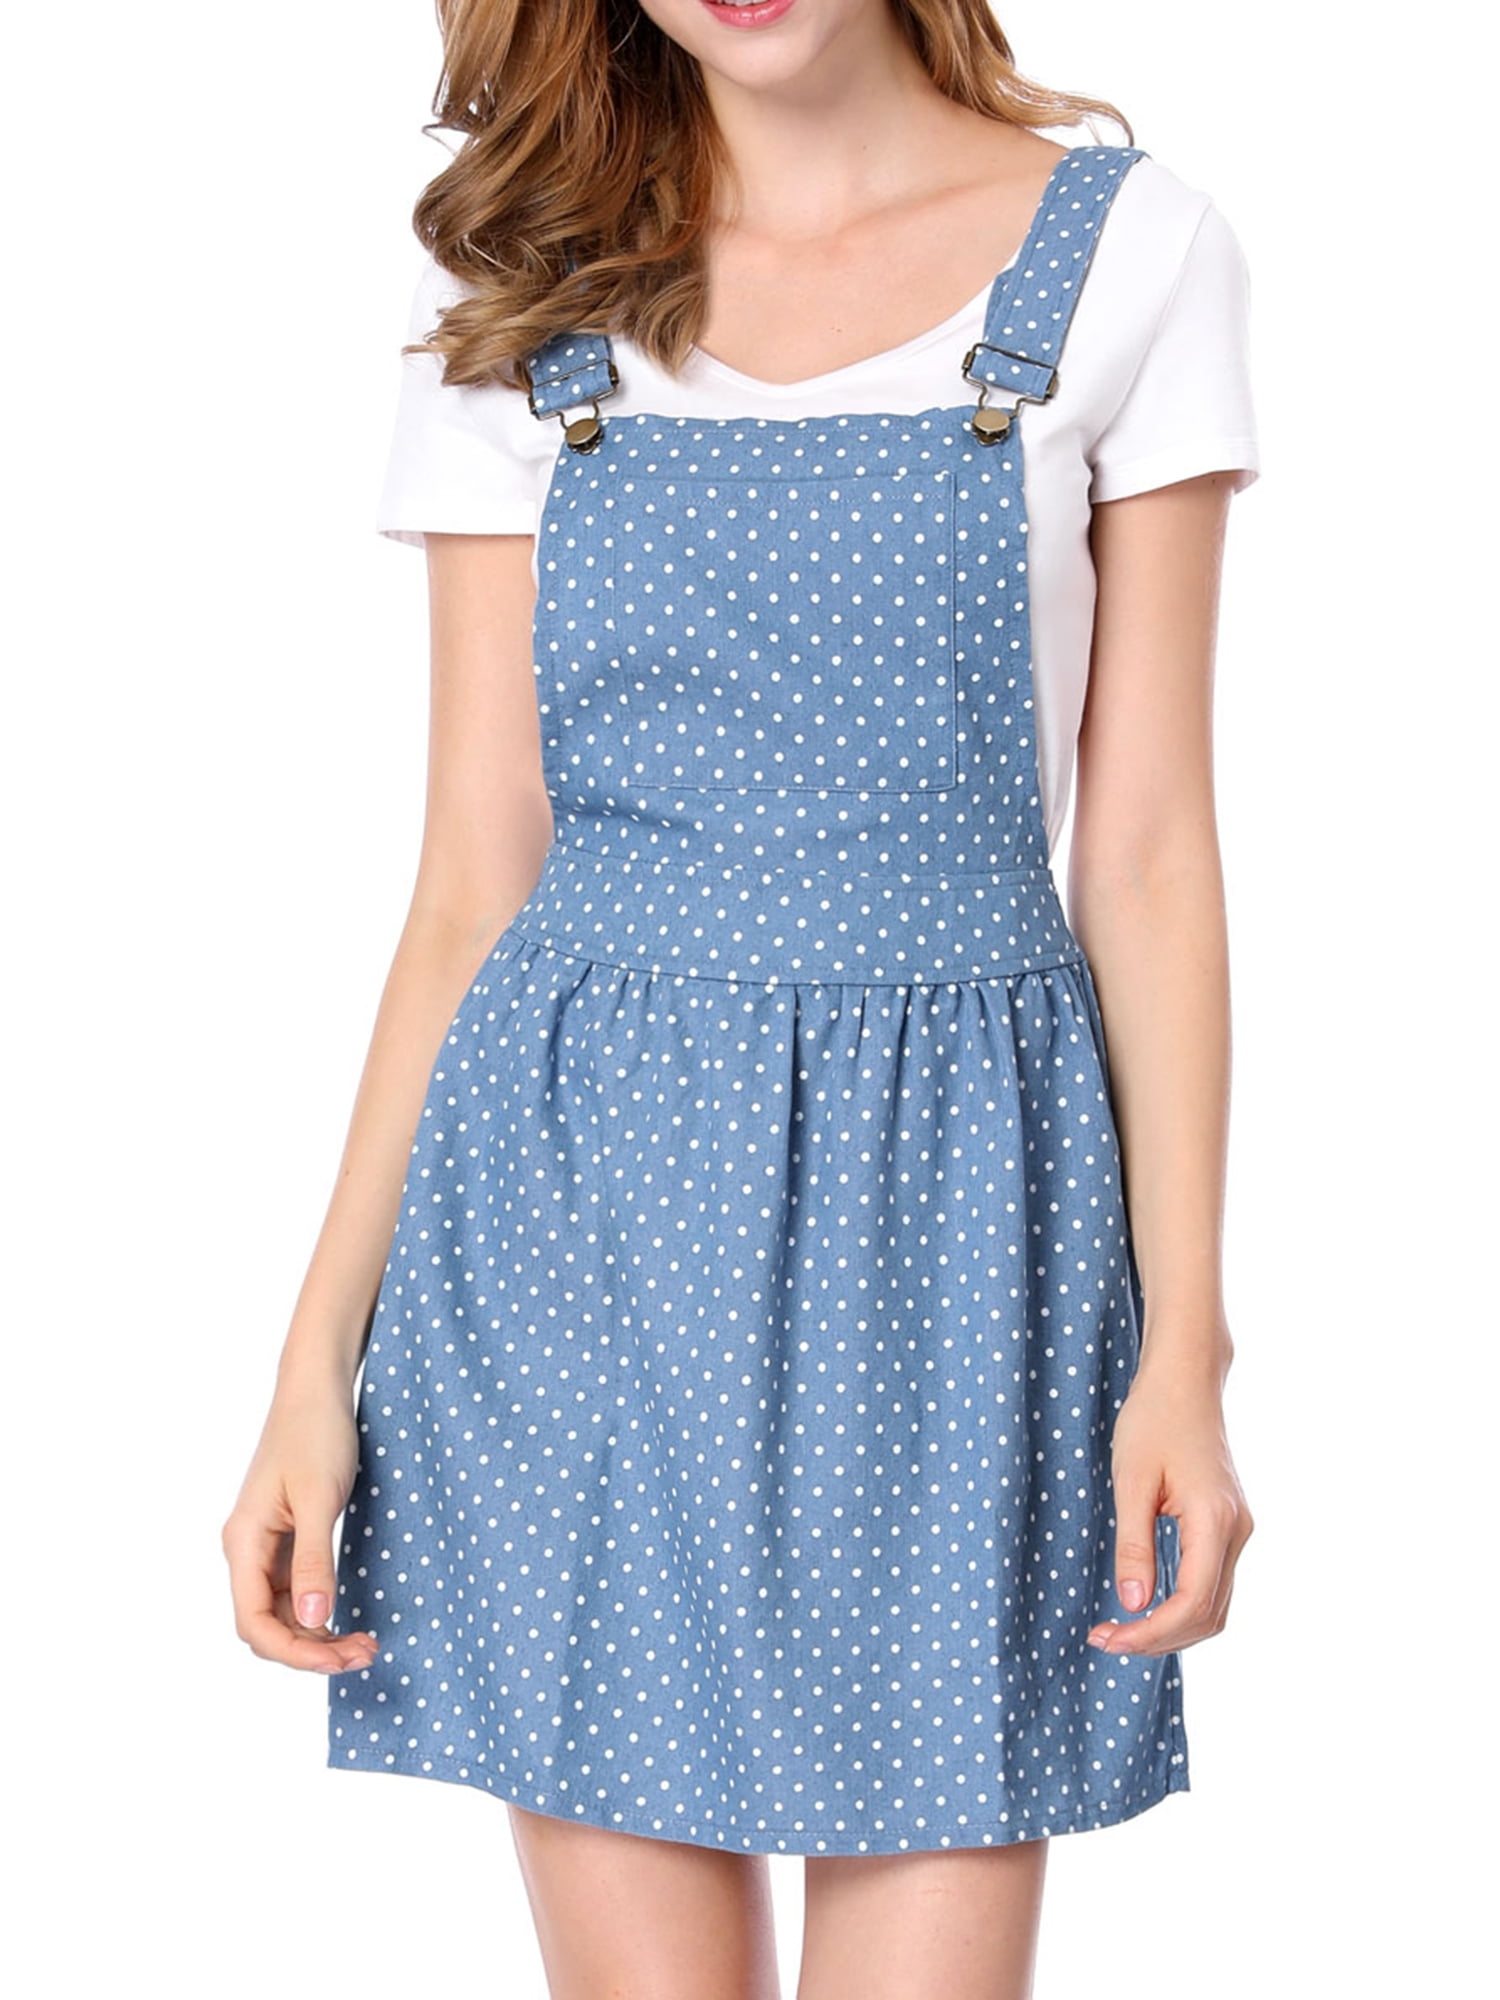 the overall dress